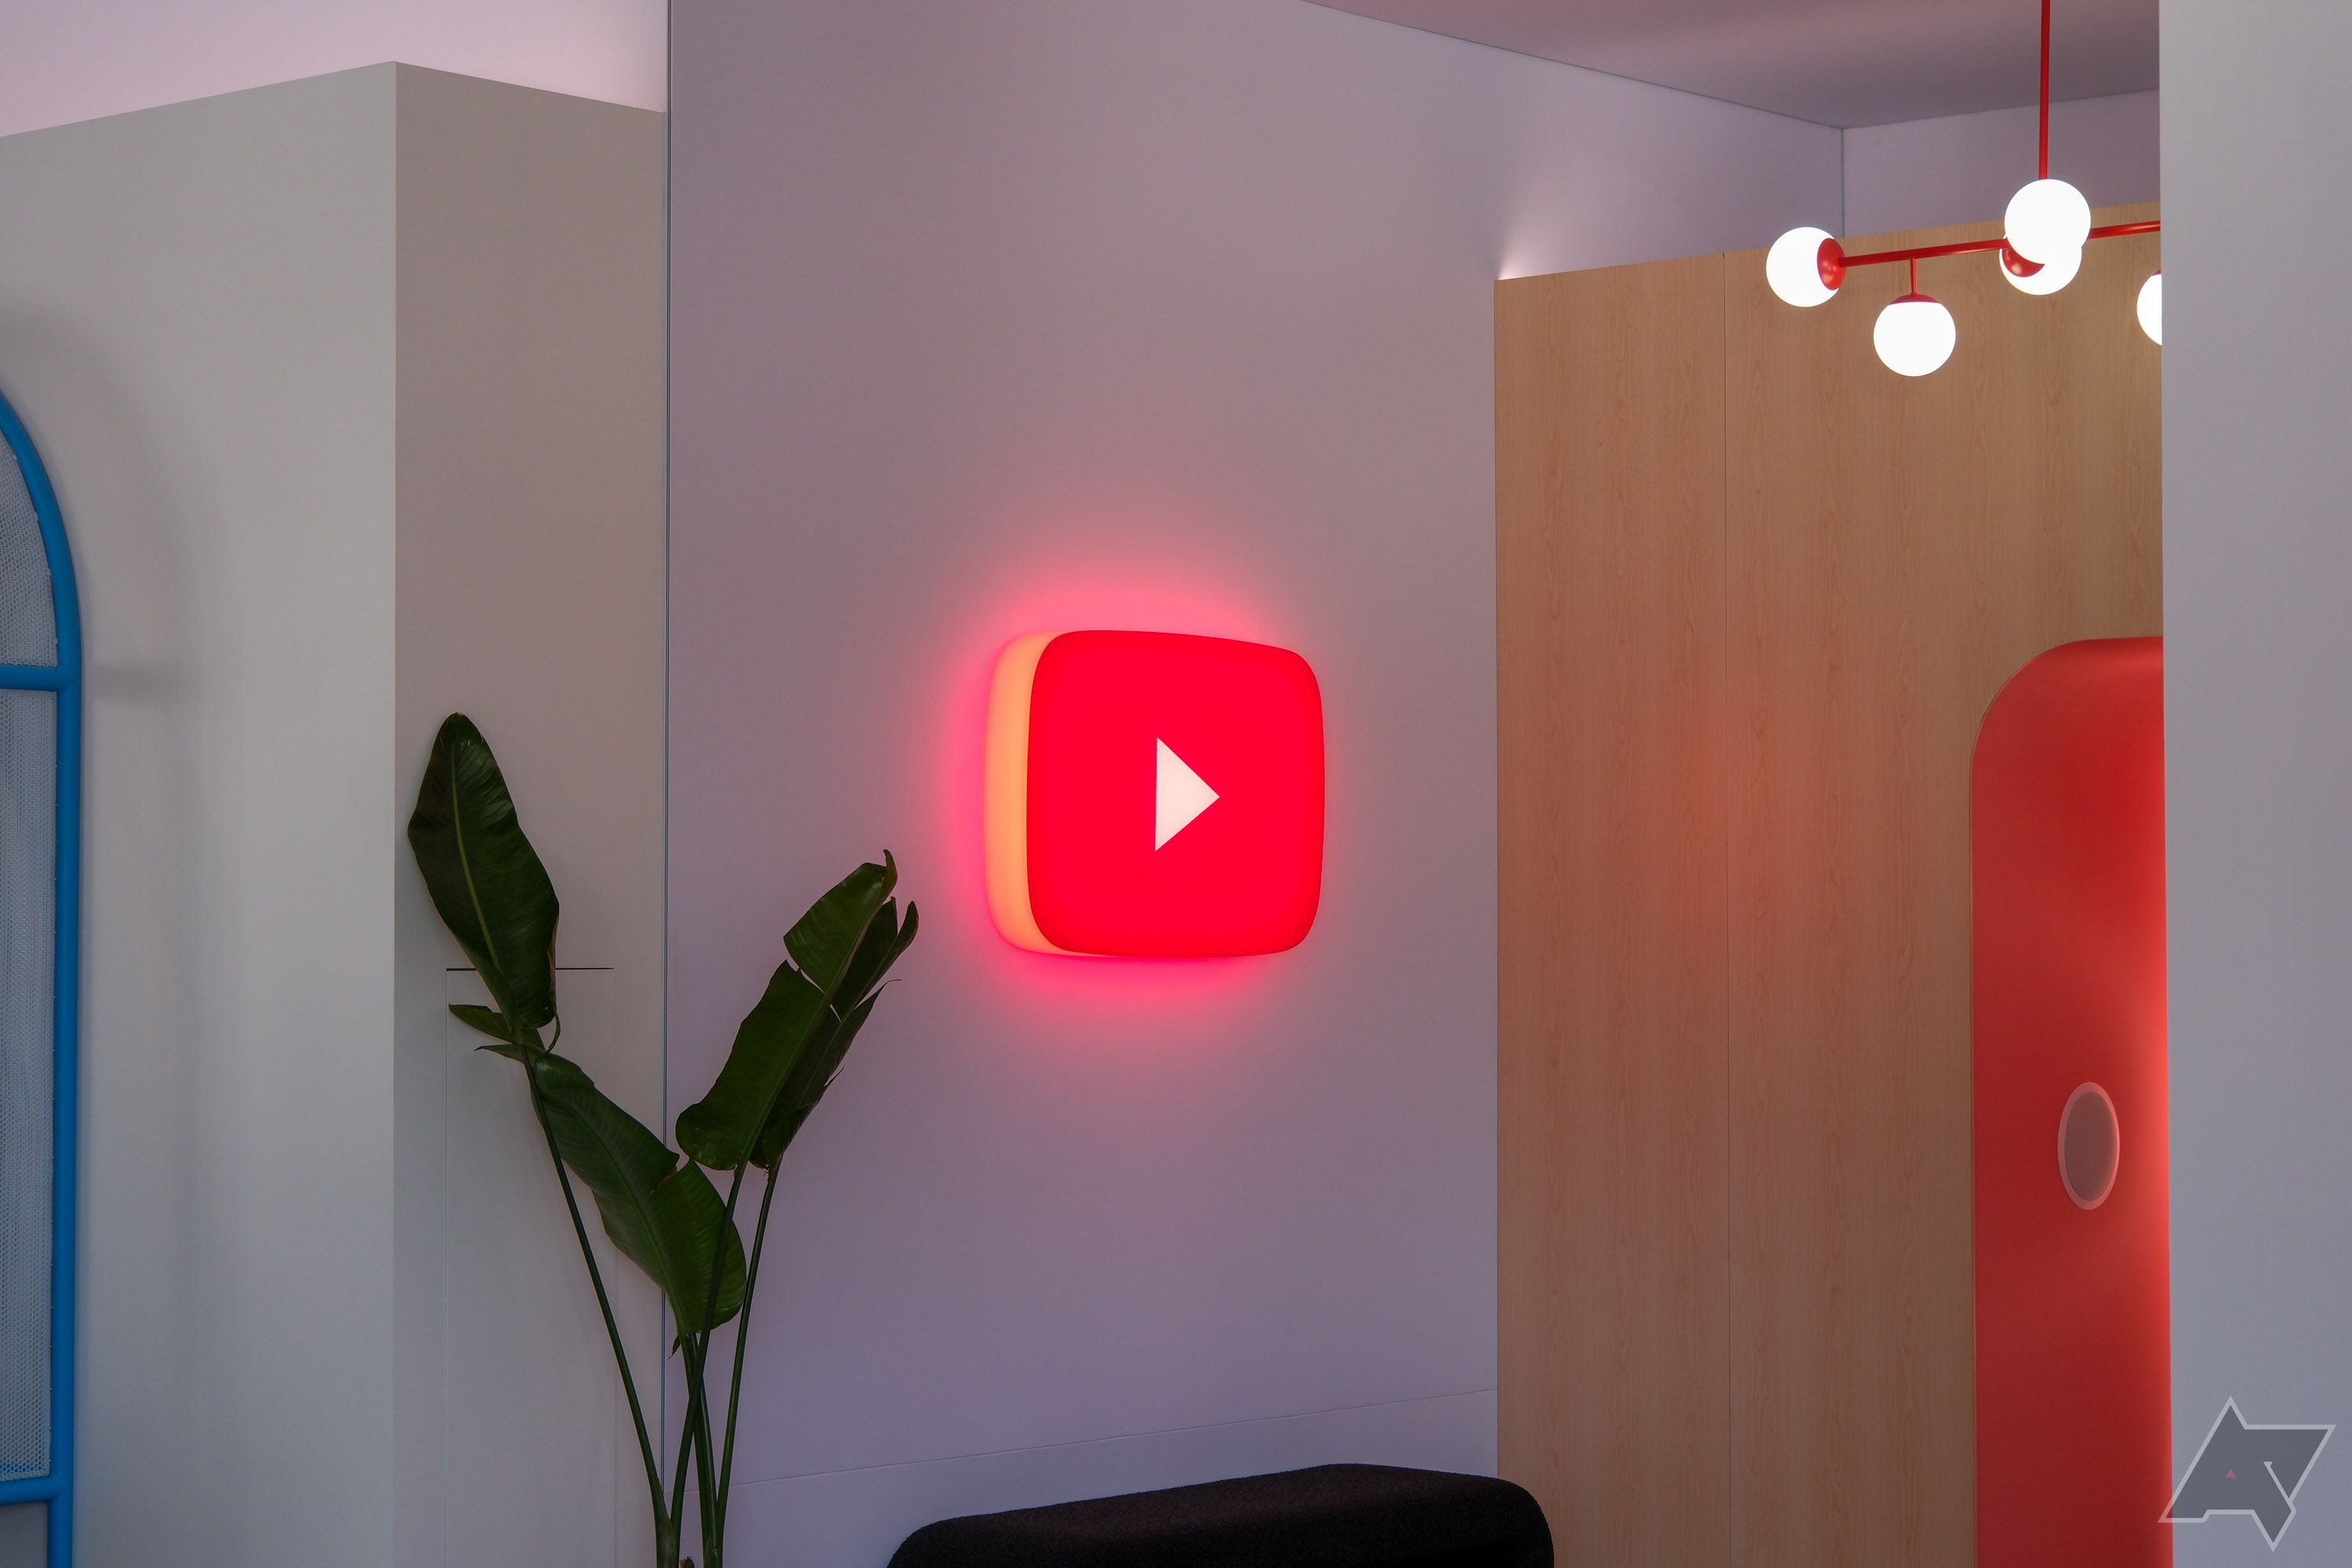 A glowing YouTube icon mounted on a wall